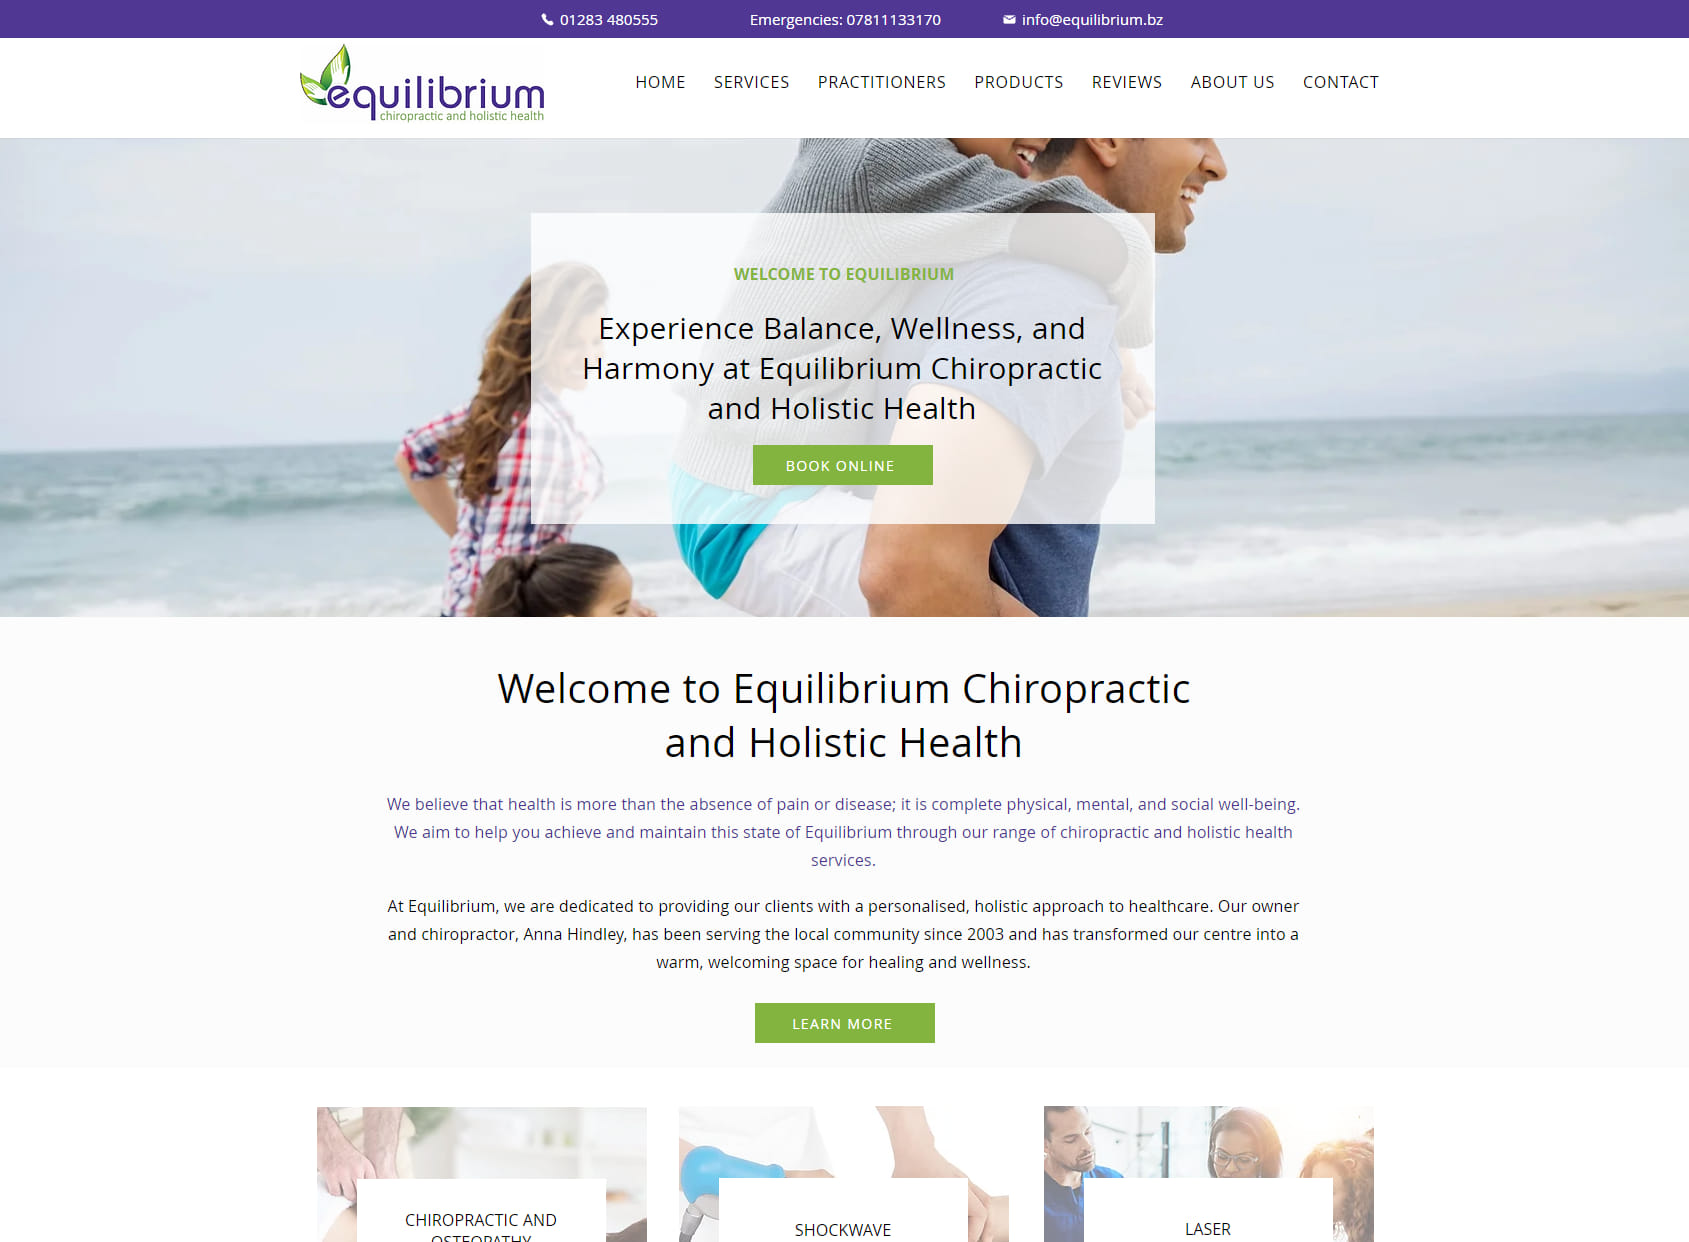 Equilibrium Chiropractic and Holistic Health - face-to-face and online service